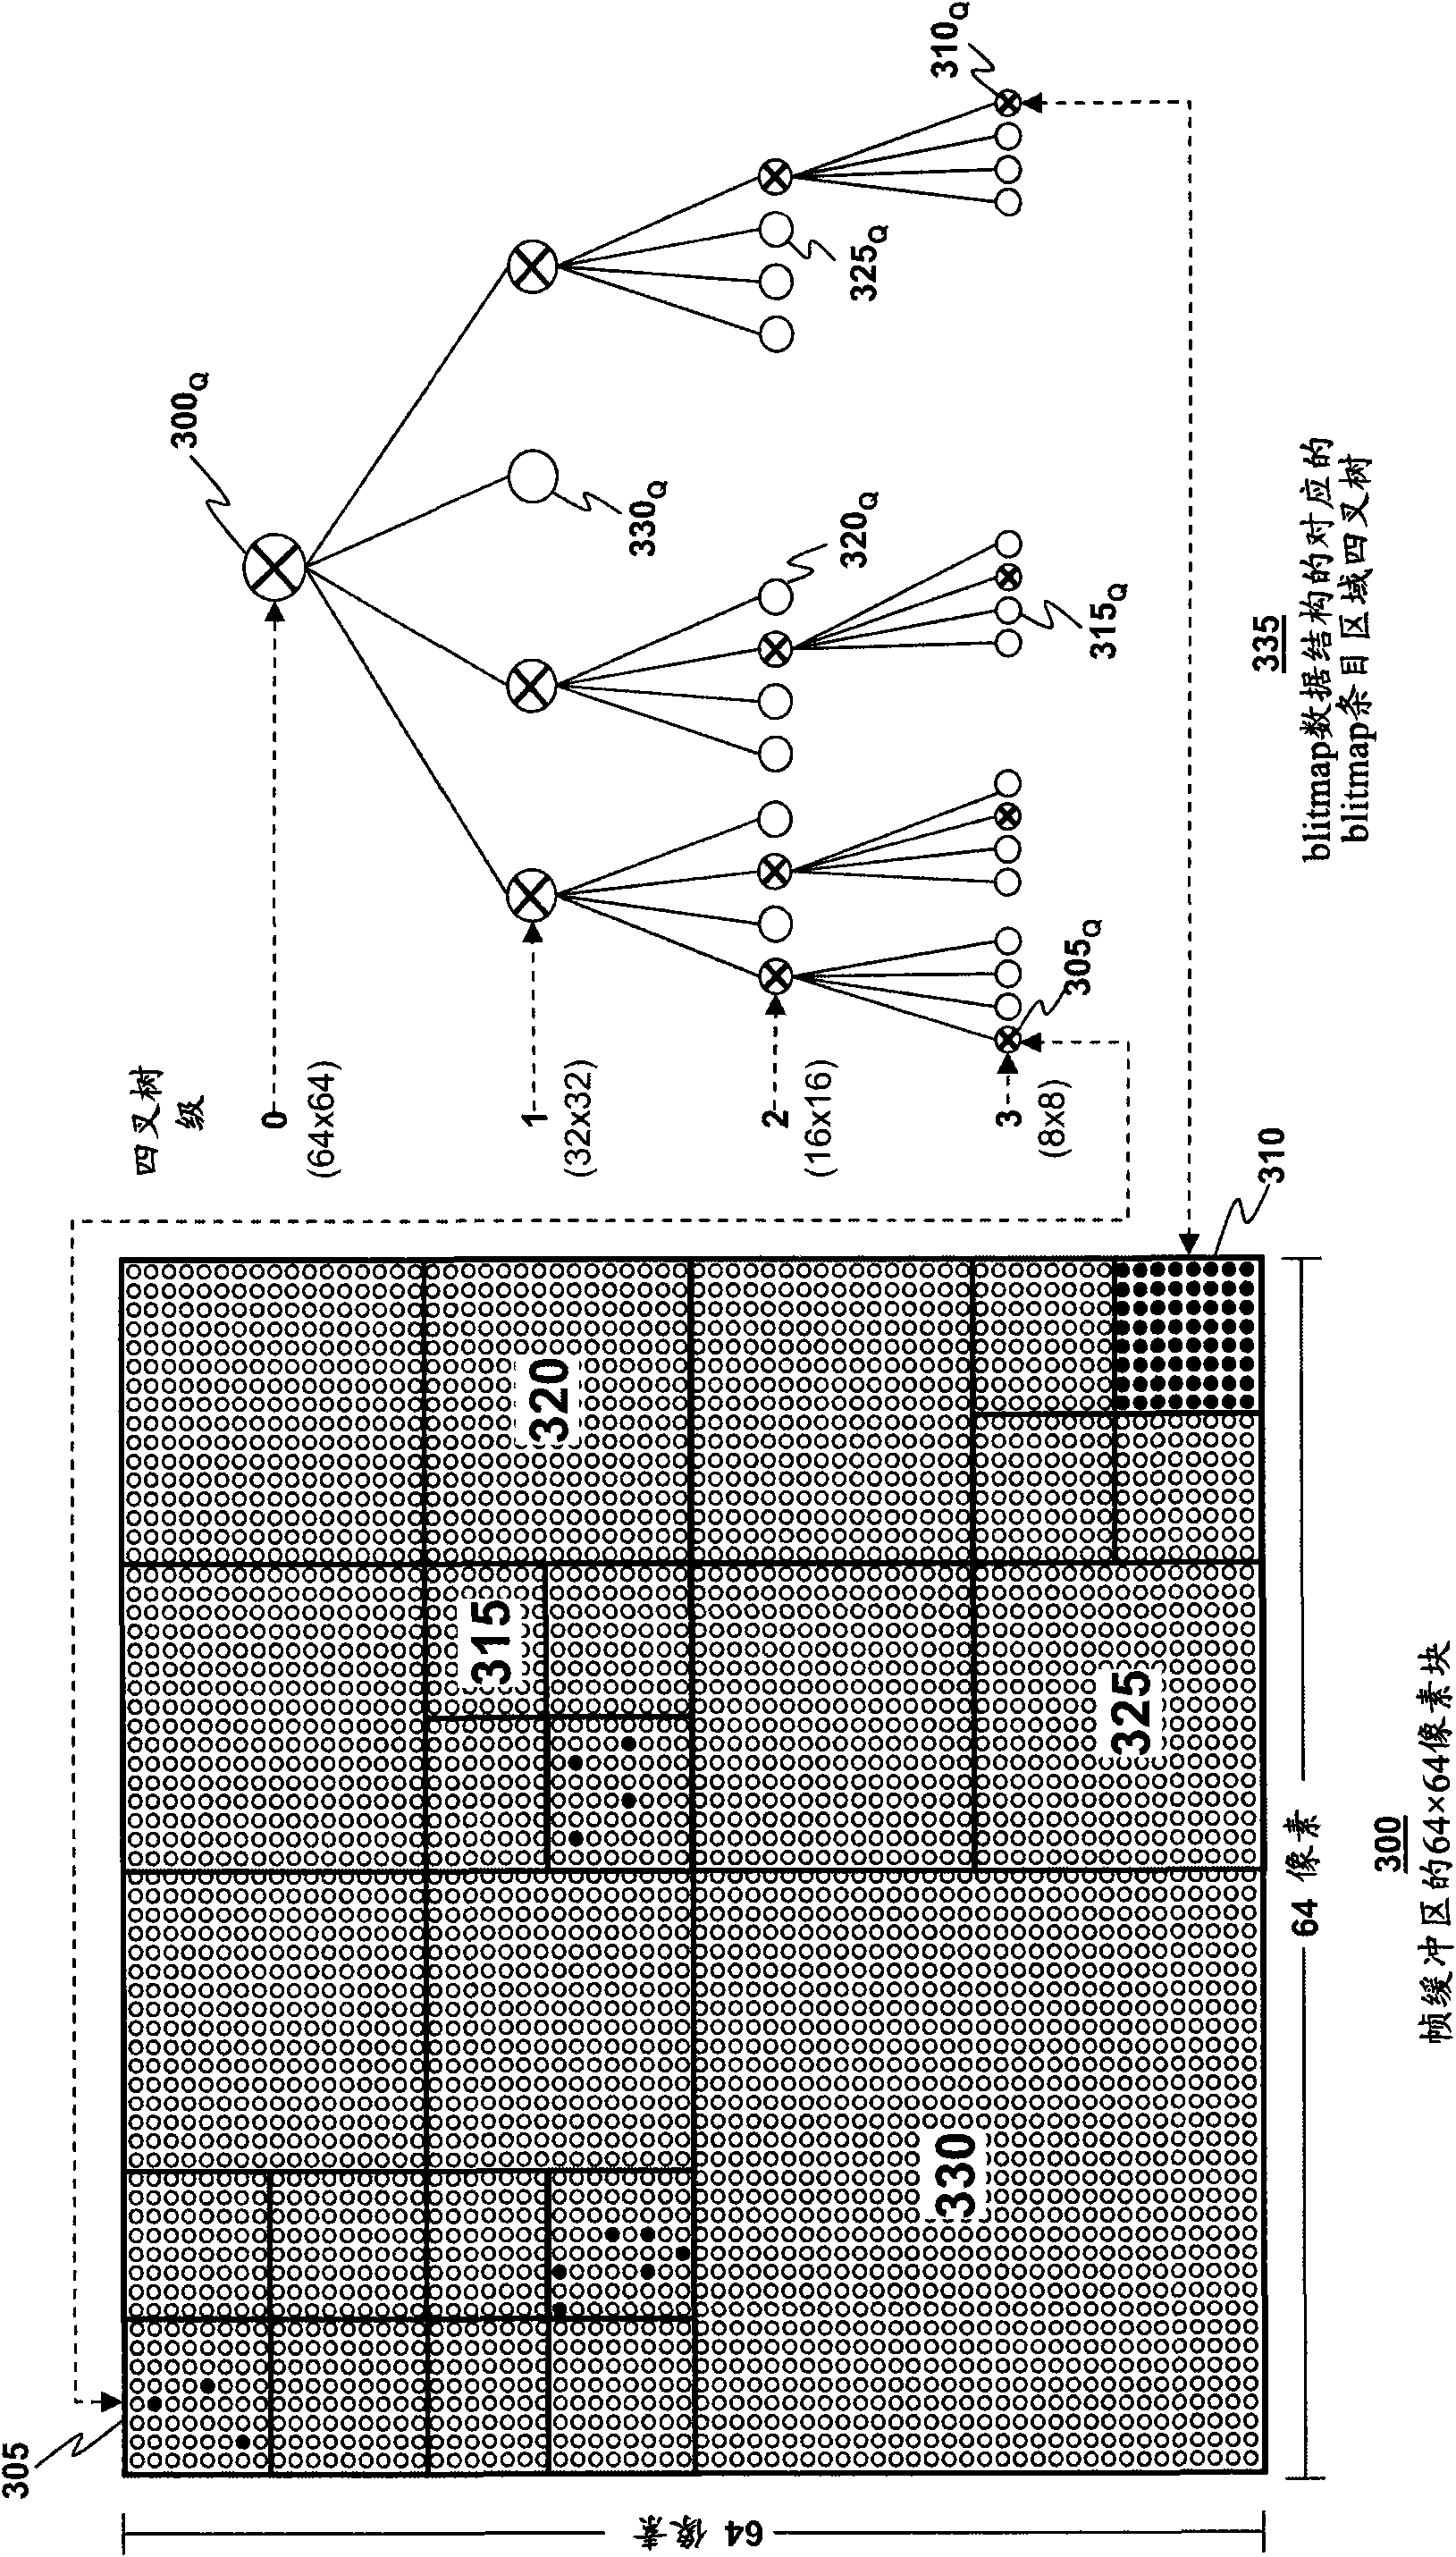 Method and system for copying a framebuffer for transmission to a remote display